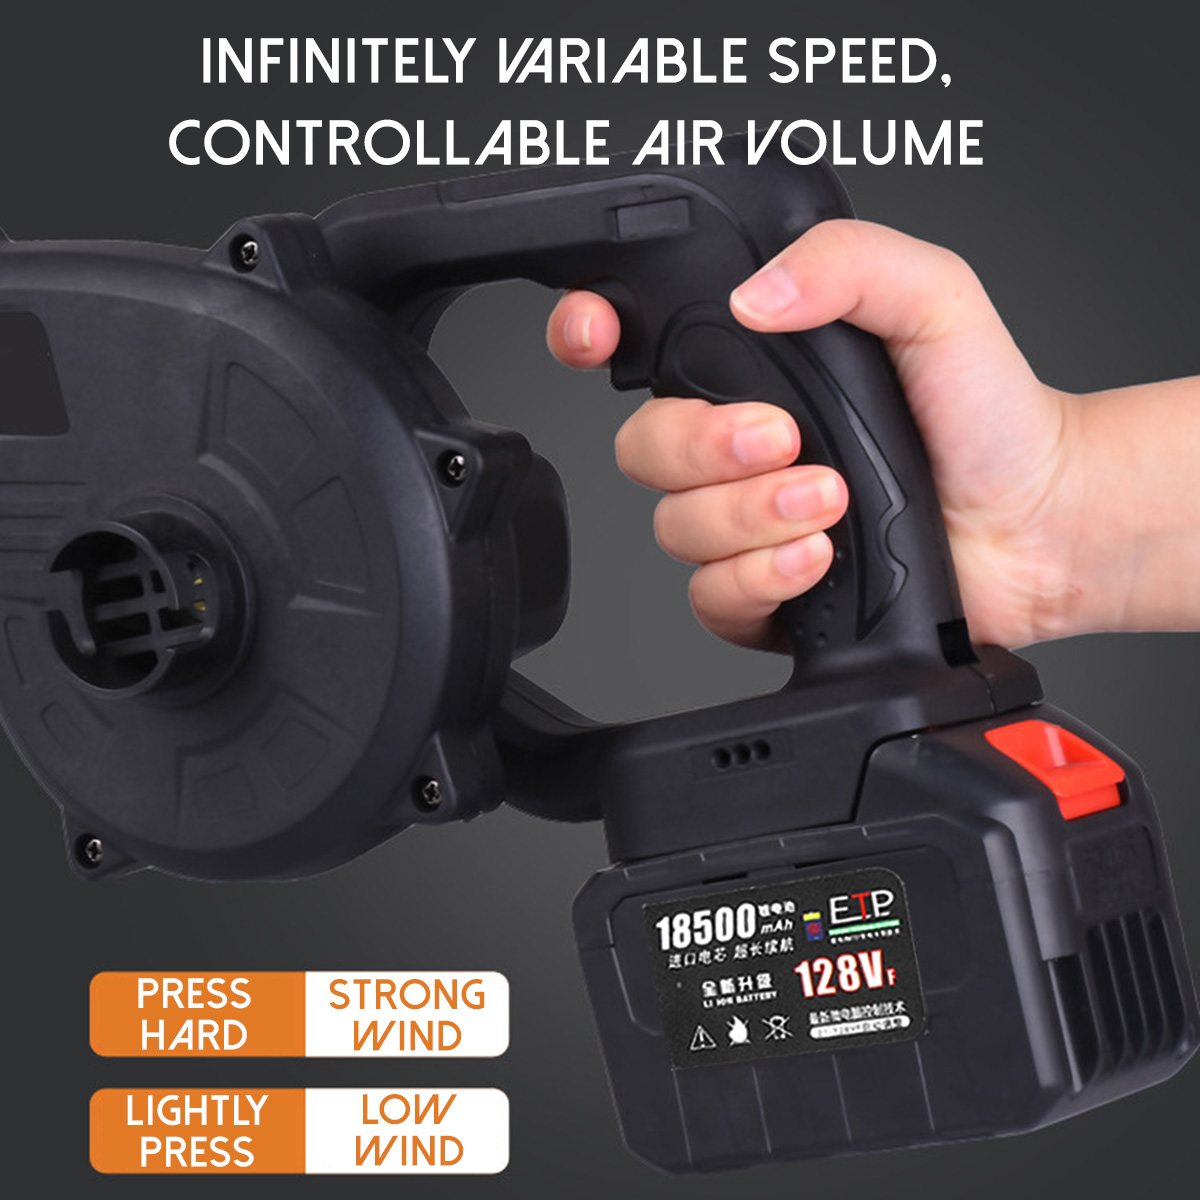 2-In-1-Cordless-Electric-Air-Blower--Suction-Handheld-Leaf-Dust-Collector-Cleaner-W-None1pc2pcs-Batt-1819094-5